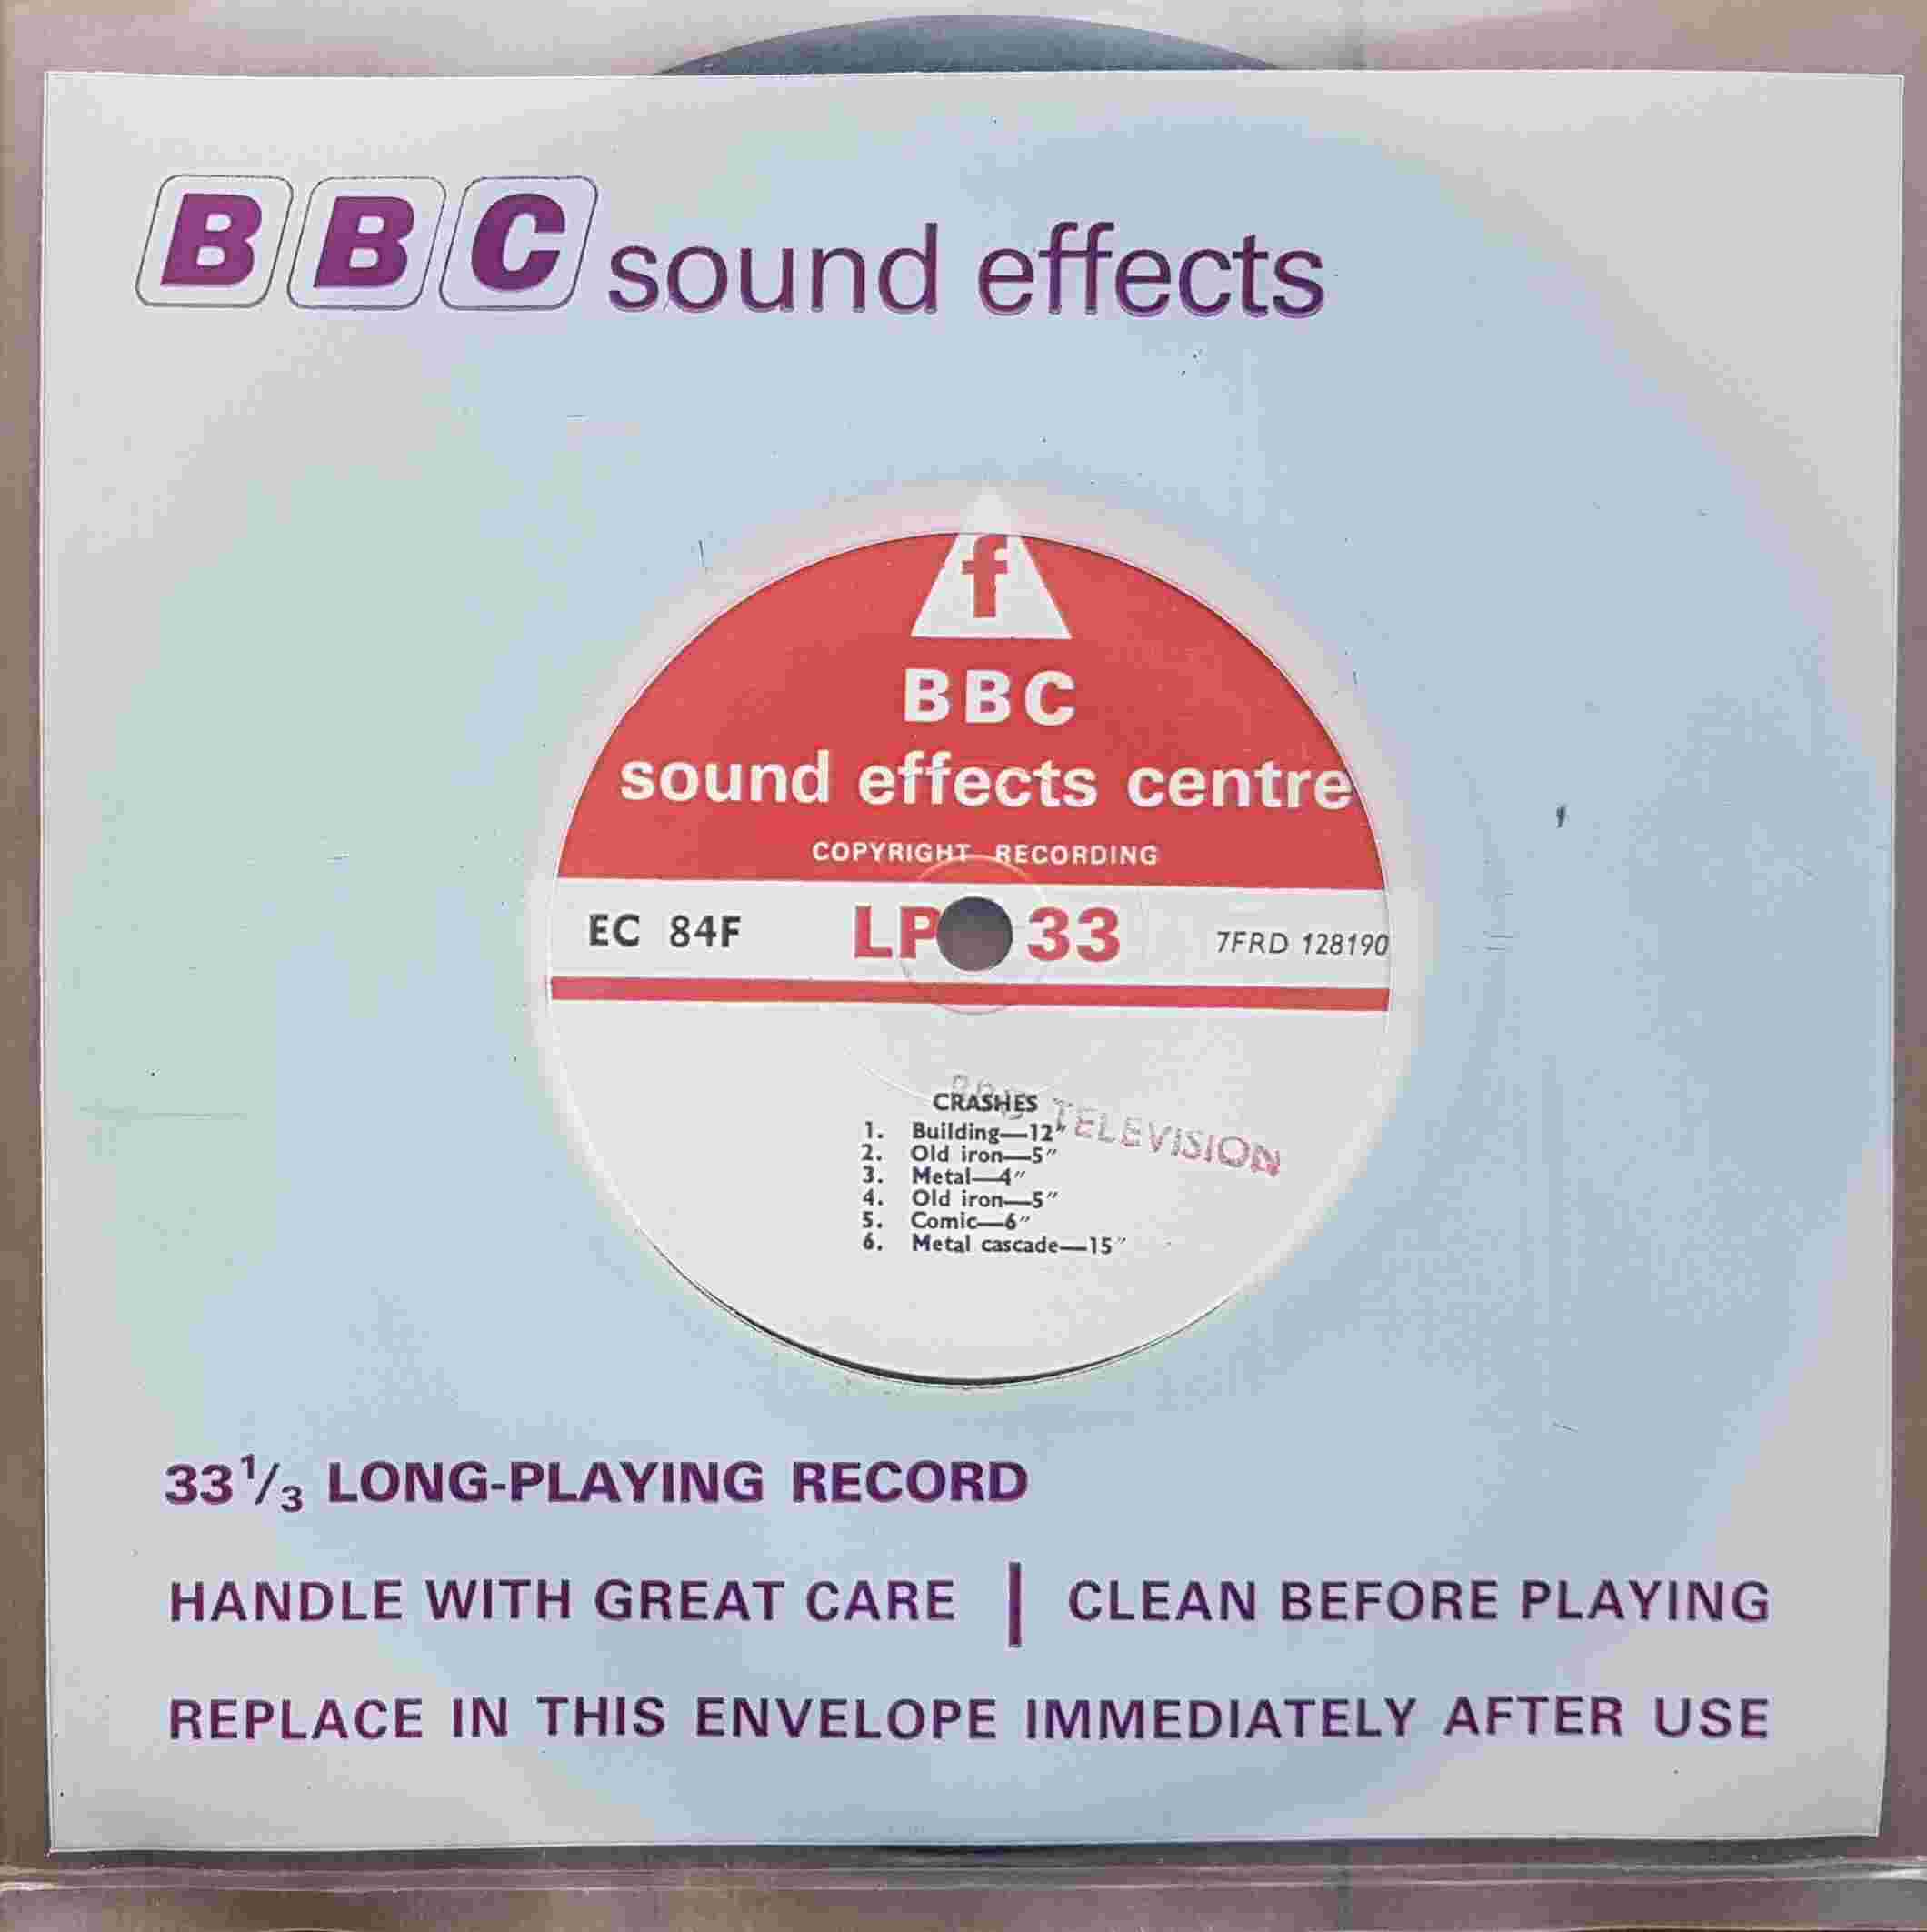 Picture of EC 84F Crashes by artist Not registered from the BBC records and Tapes library